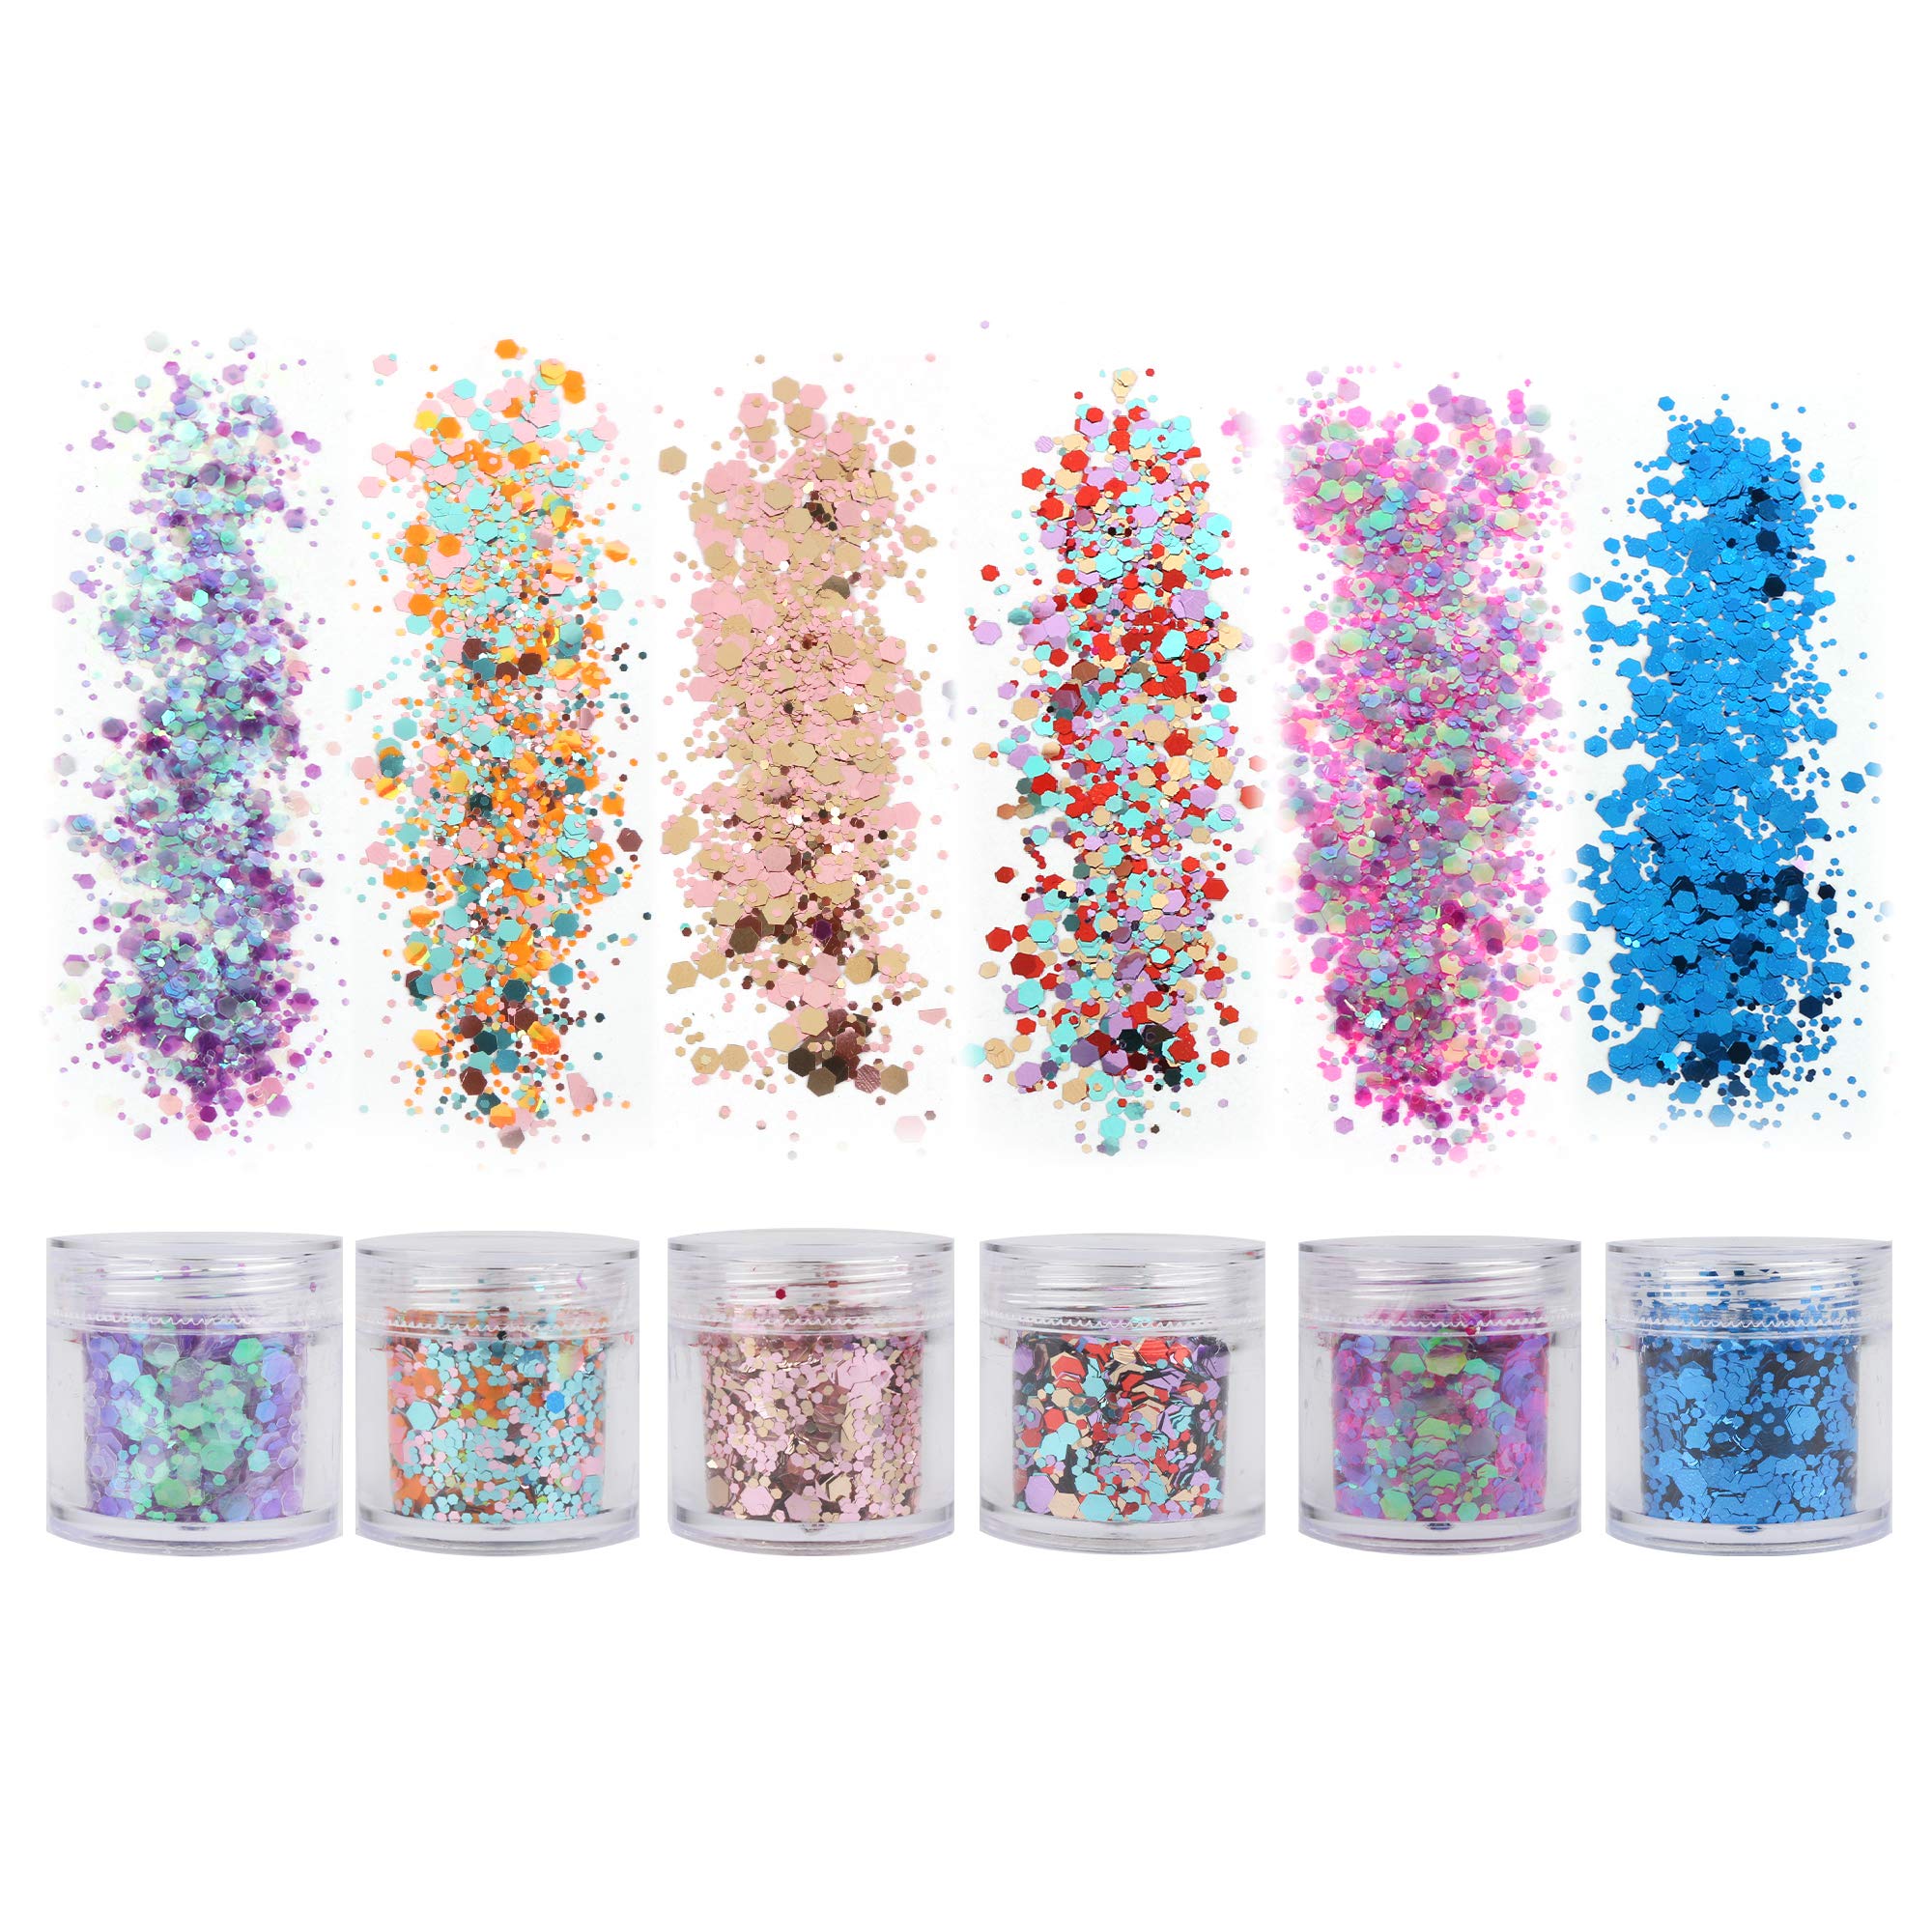 18 Boxes Holographic Cosmetic Festival Chunky Glitters Sequins, Nail Sequins Iridescent Flakes, Cosmetic Paillette Ultra-Thin Tips, for Body Face Hair Make Up Nail Art Mixed Color Glitter